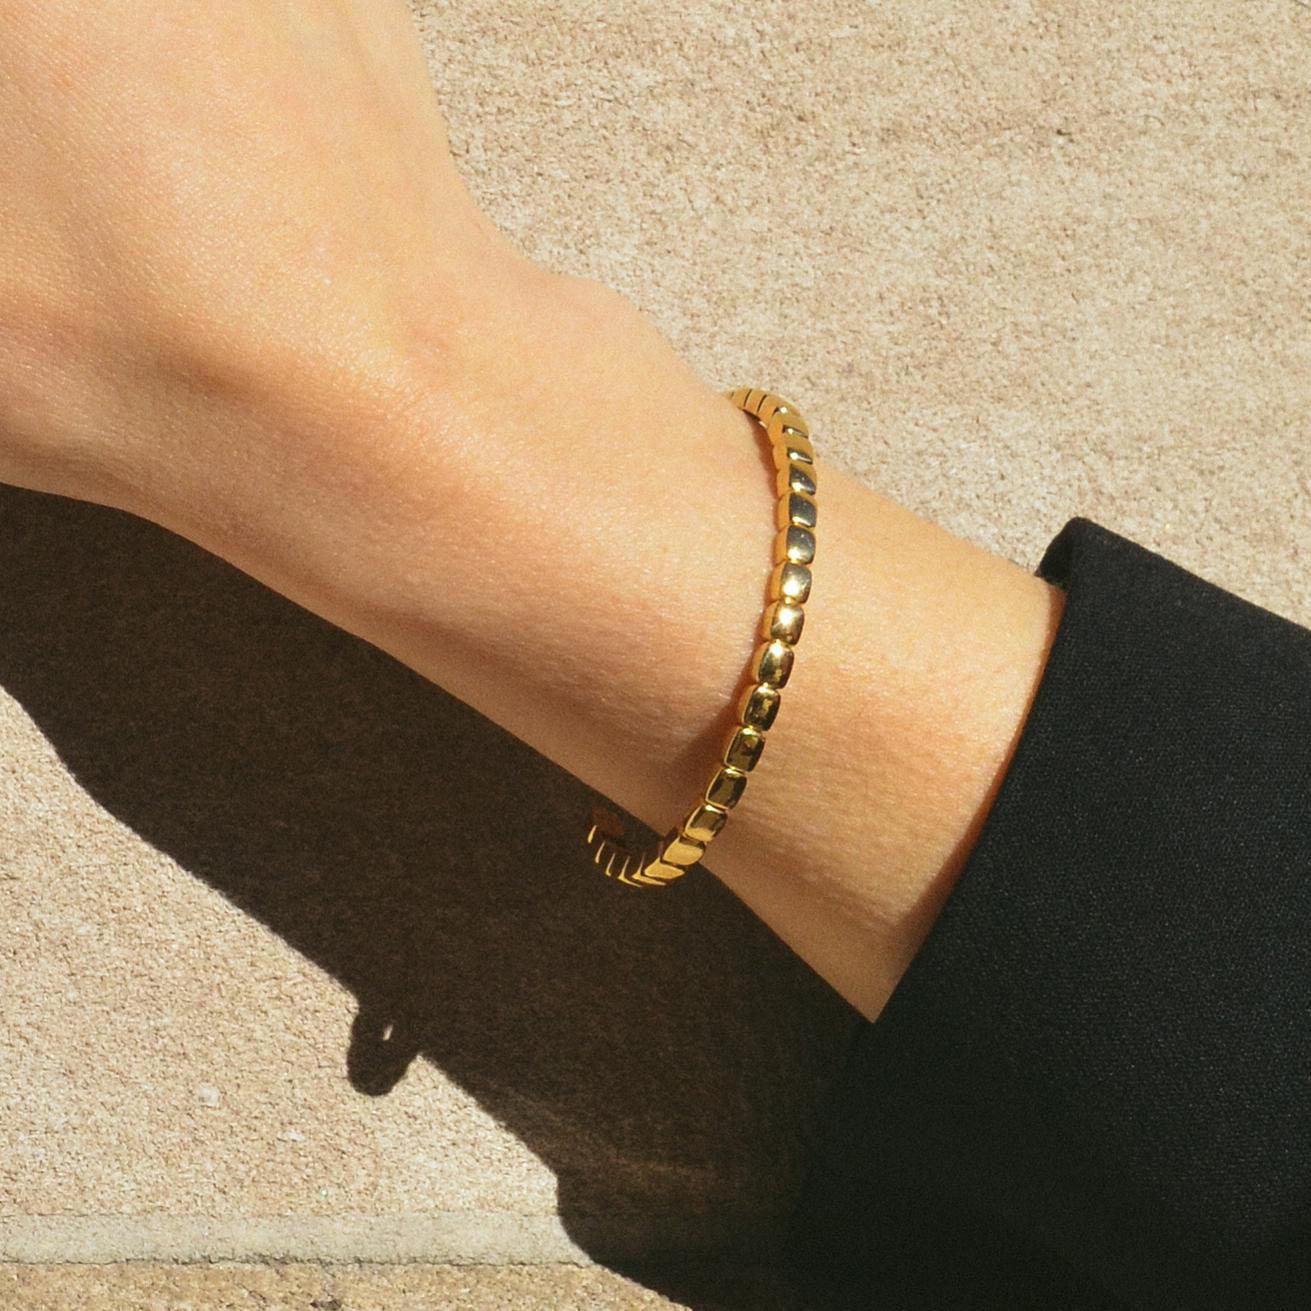 Futura Jewelry created LINK to grow a community of wearers that would bring focus to the reality that eco consciousness in jewelry is possible. Every first follower wearing the bracelet sends a message that they support efforts to improve mining